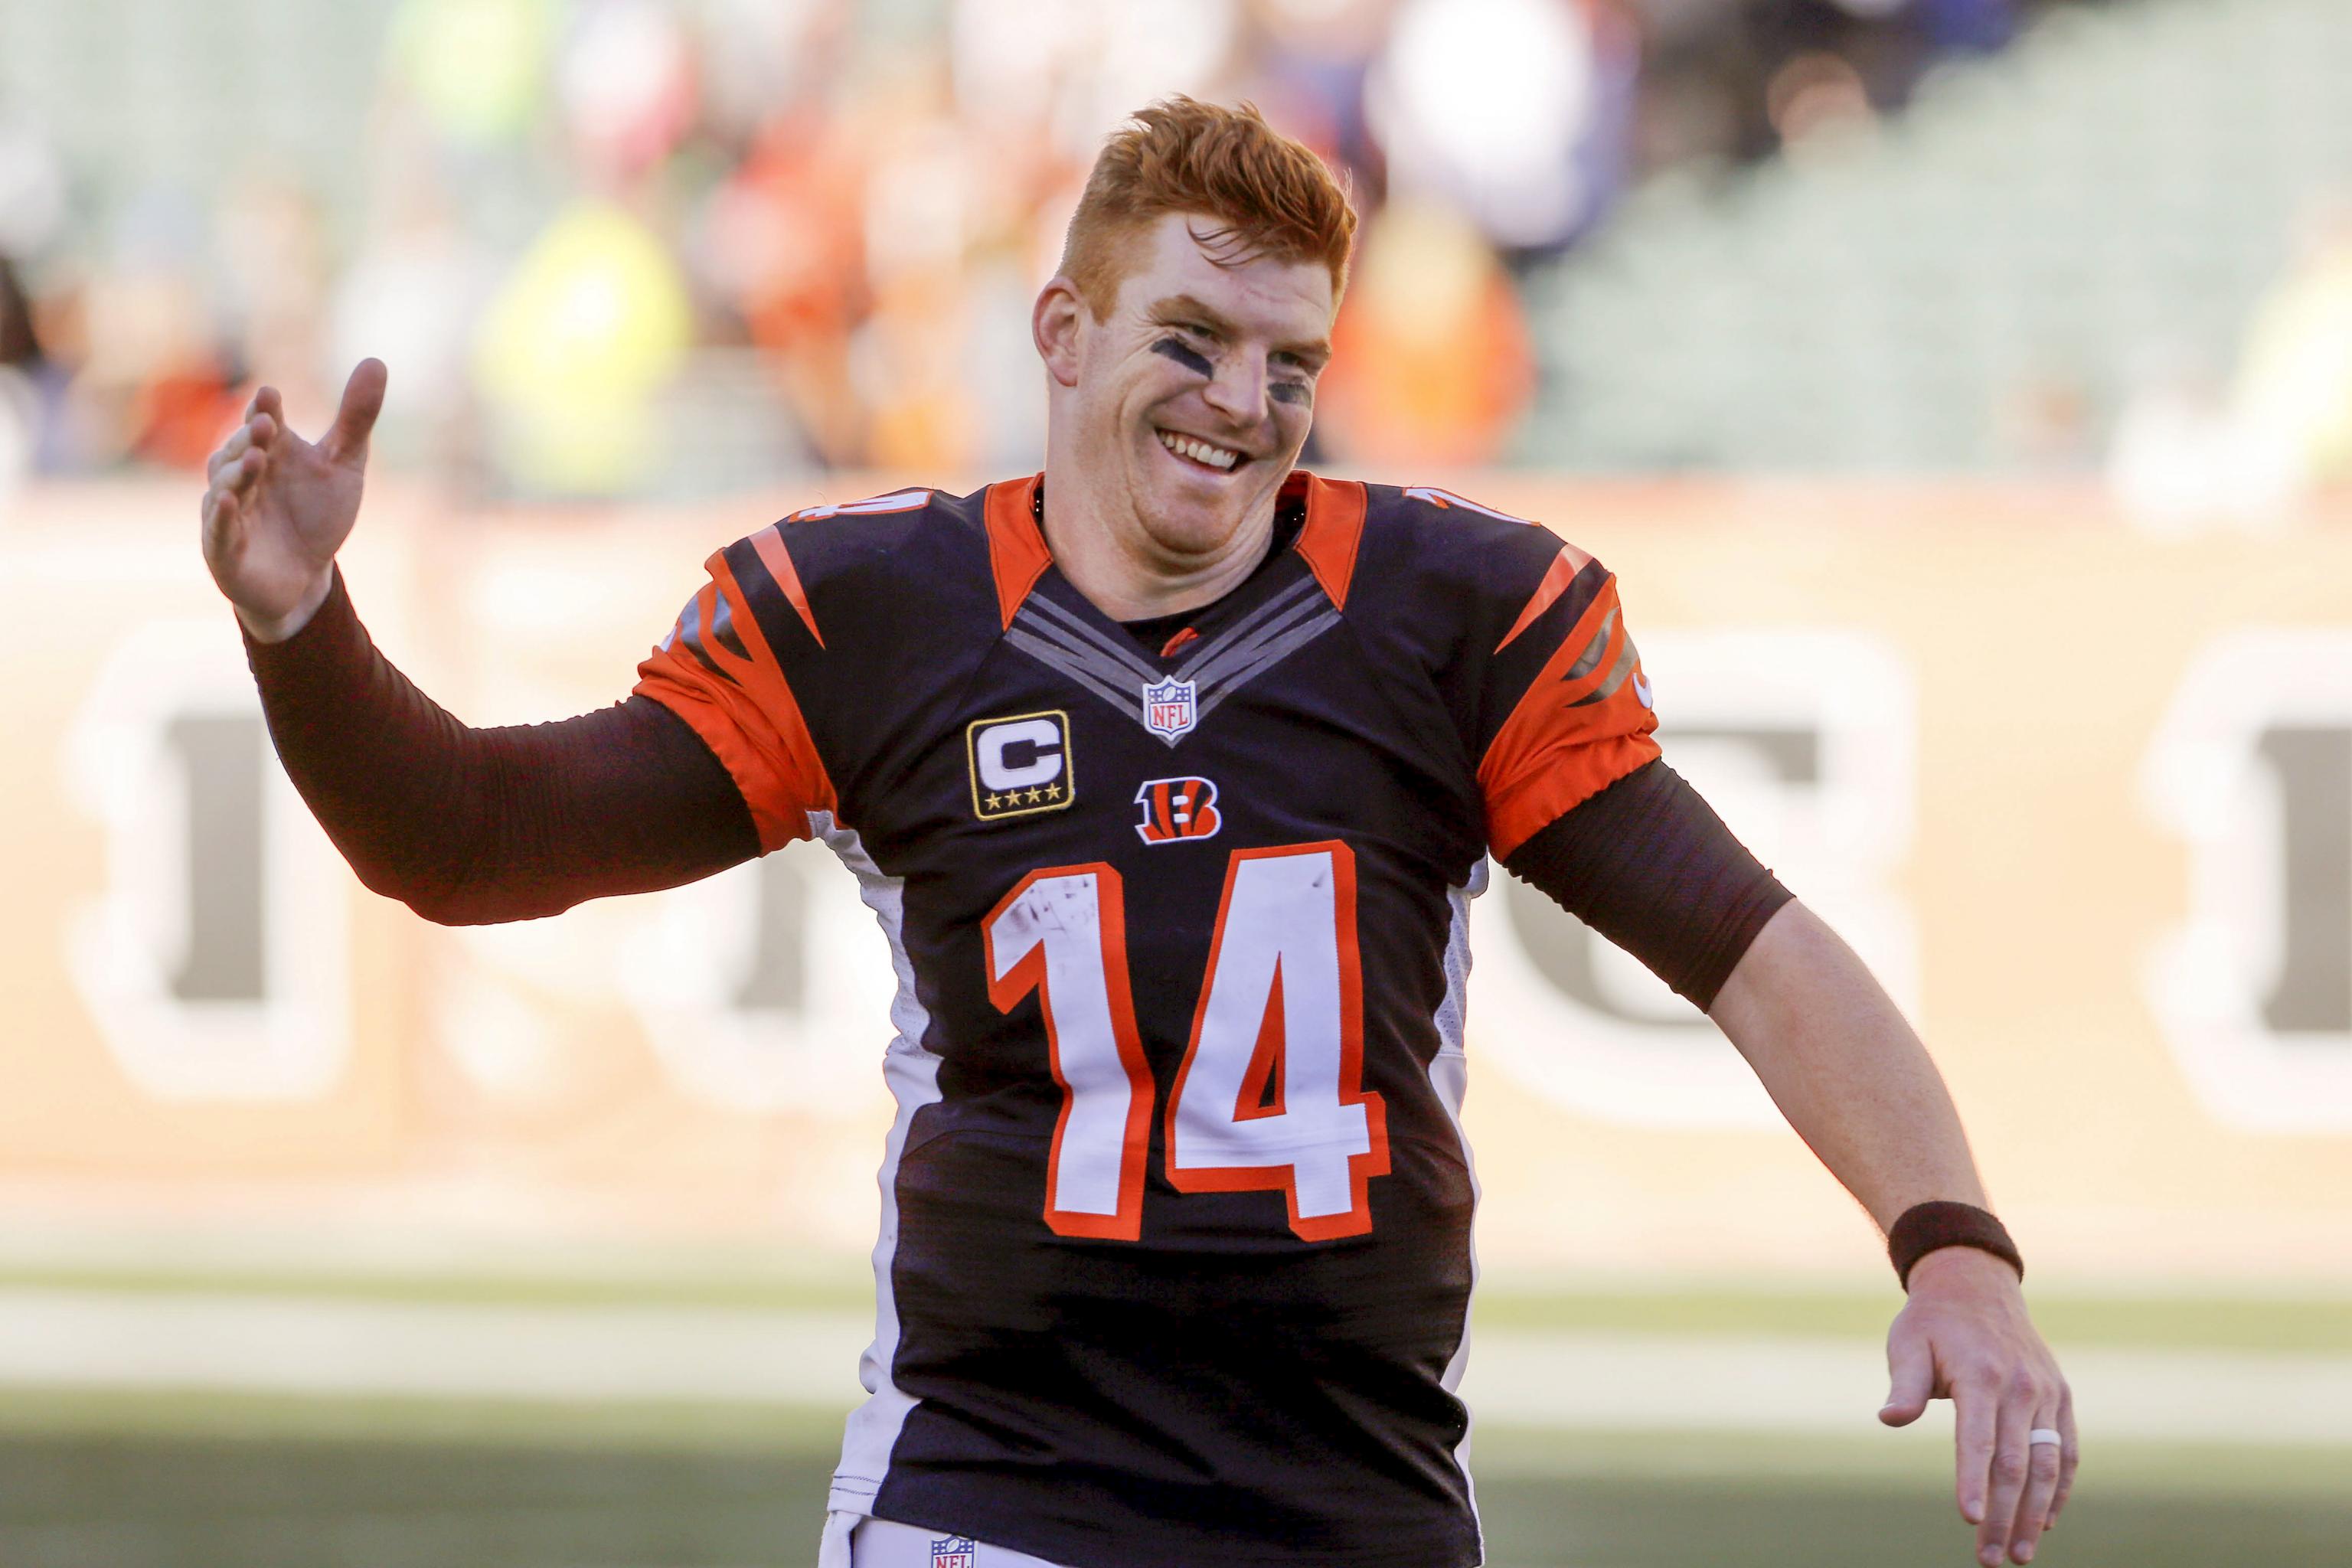 Fond farewell: Andy Dalton leads Bengals over Browns 33-23